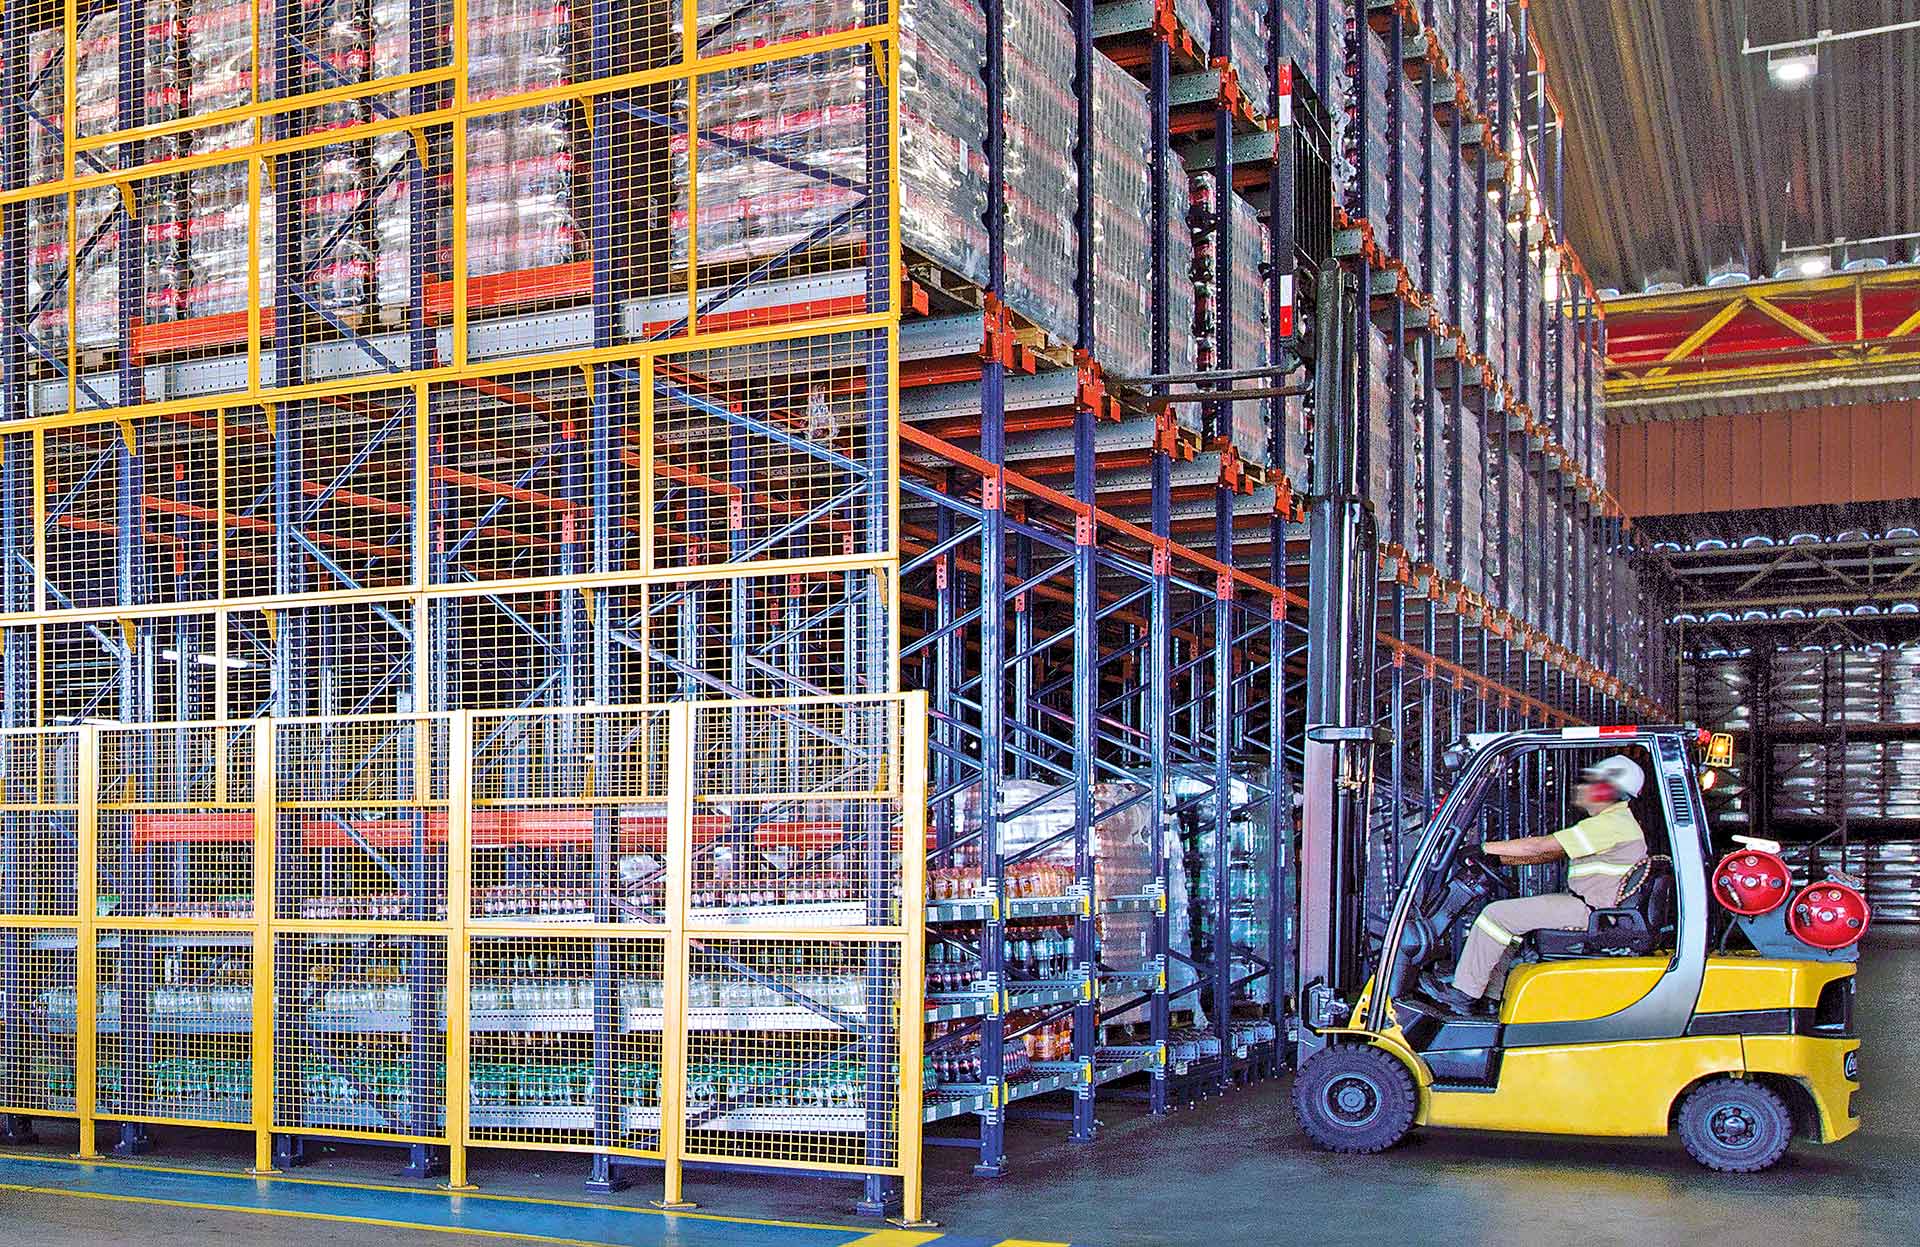 The lower level of the Pallet Shuttle storage system can be reserved for carton live picking